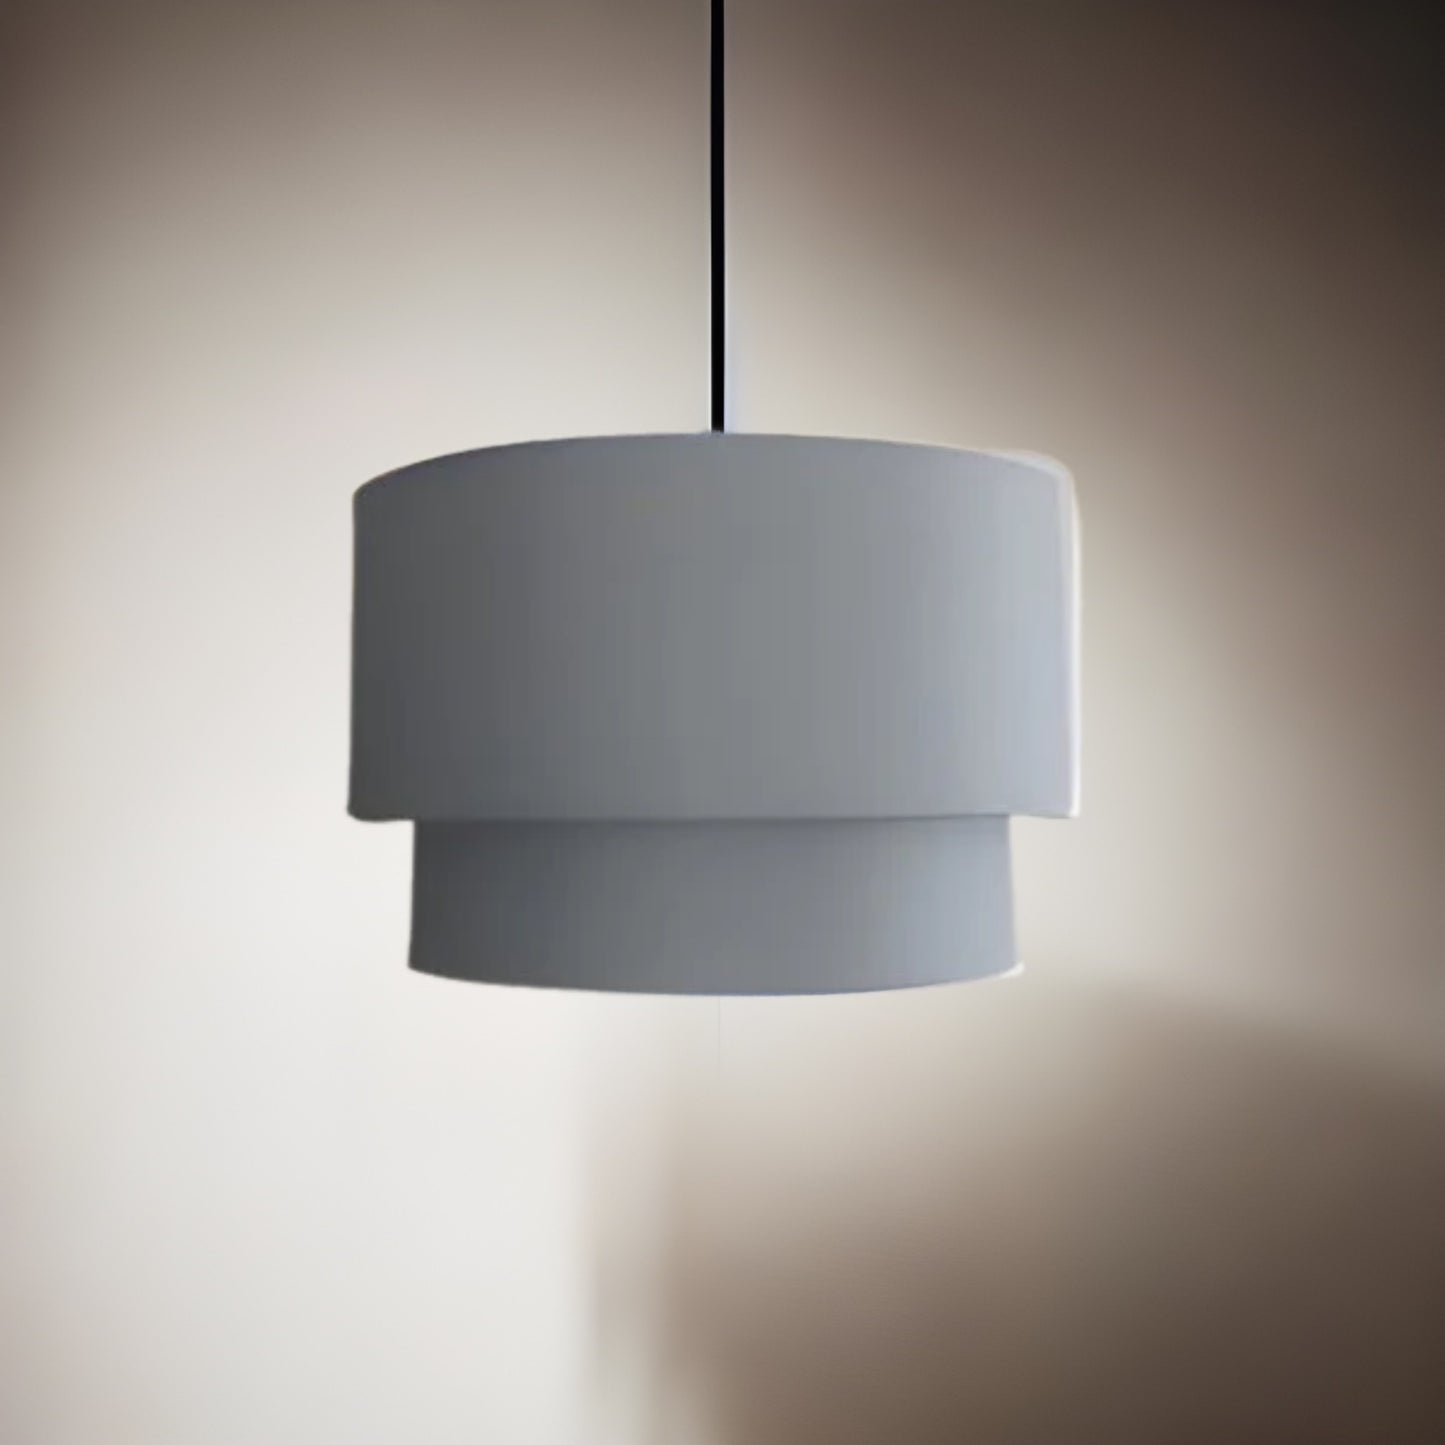 Our Kimber easy fit two tiered luxury fabric double layered shade is contemporary in its appearance and we have designed the shade to suit a range of interiors. Easy to fit simply attached to an existing pendant flitting.  It is crafted from high quality fabric material in two layers and complimented with a white inner.